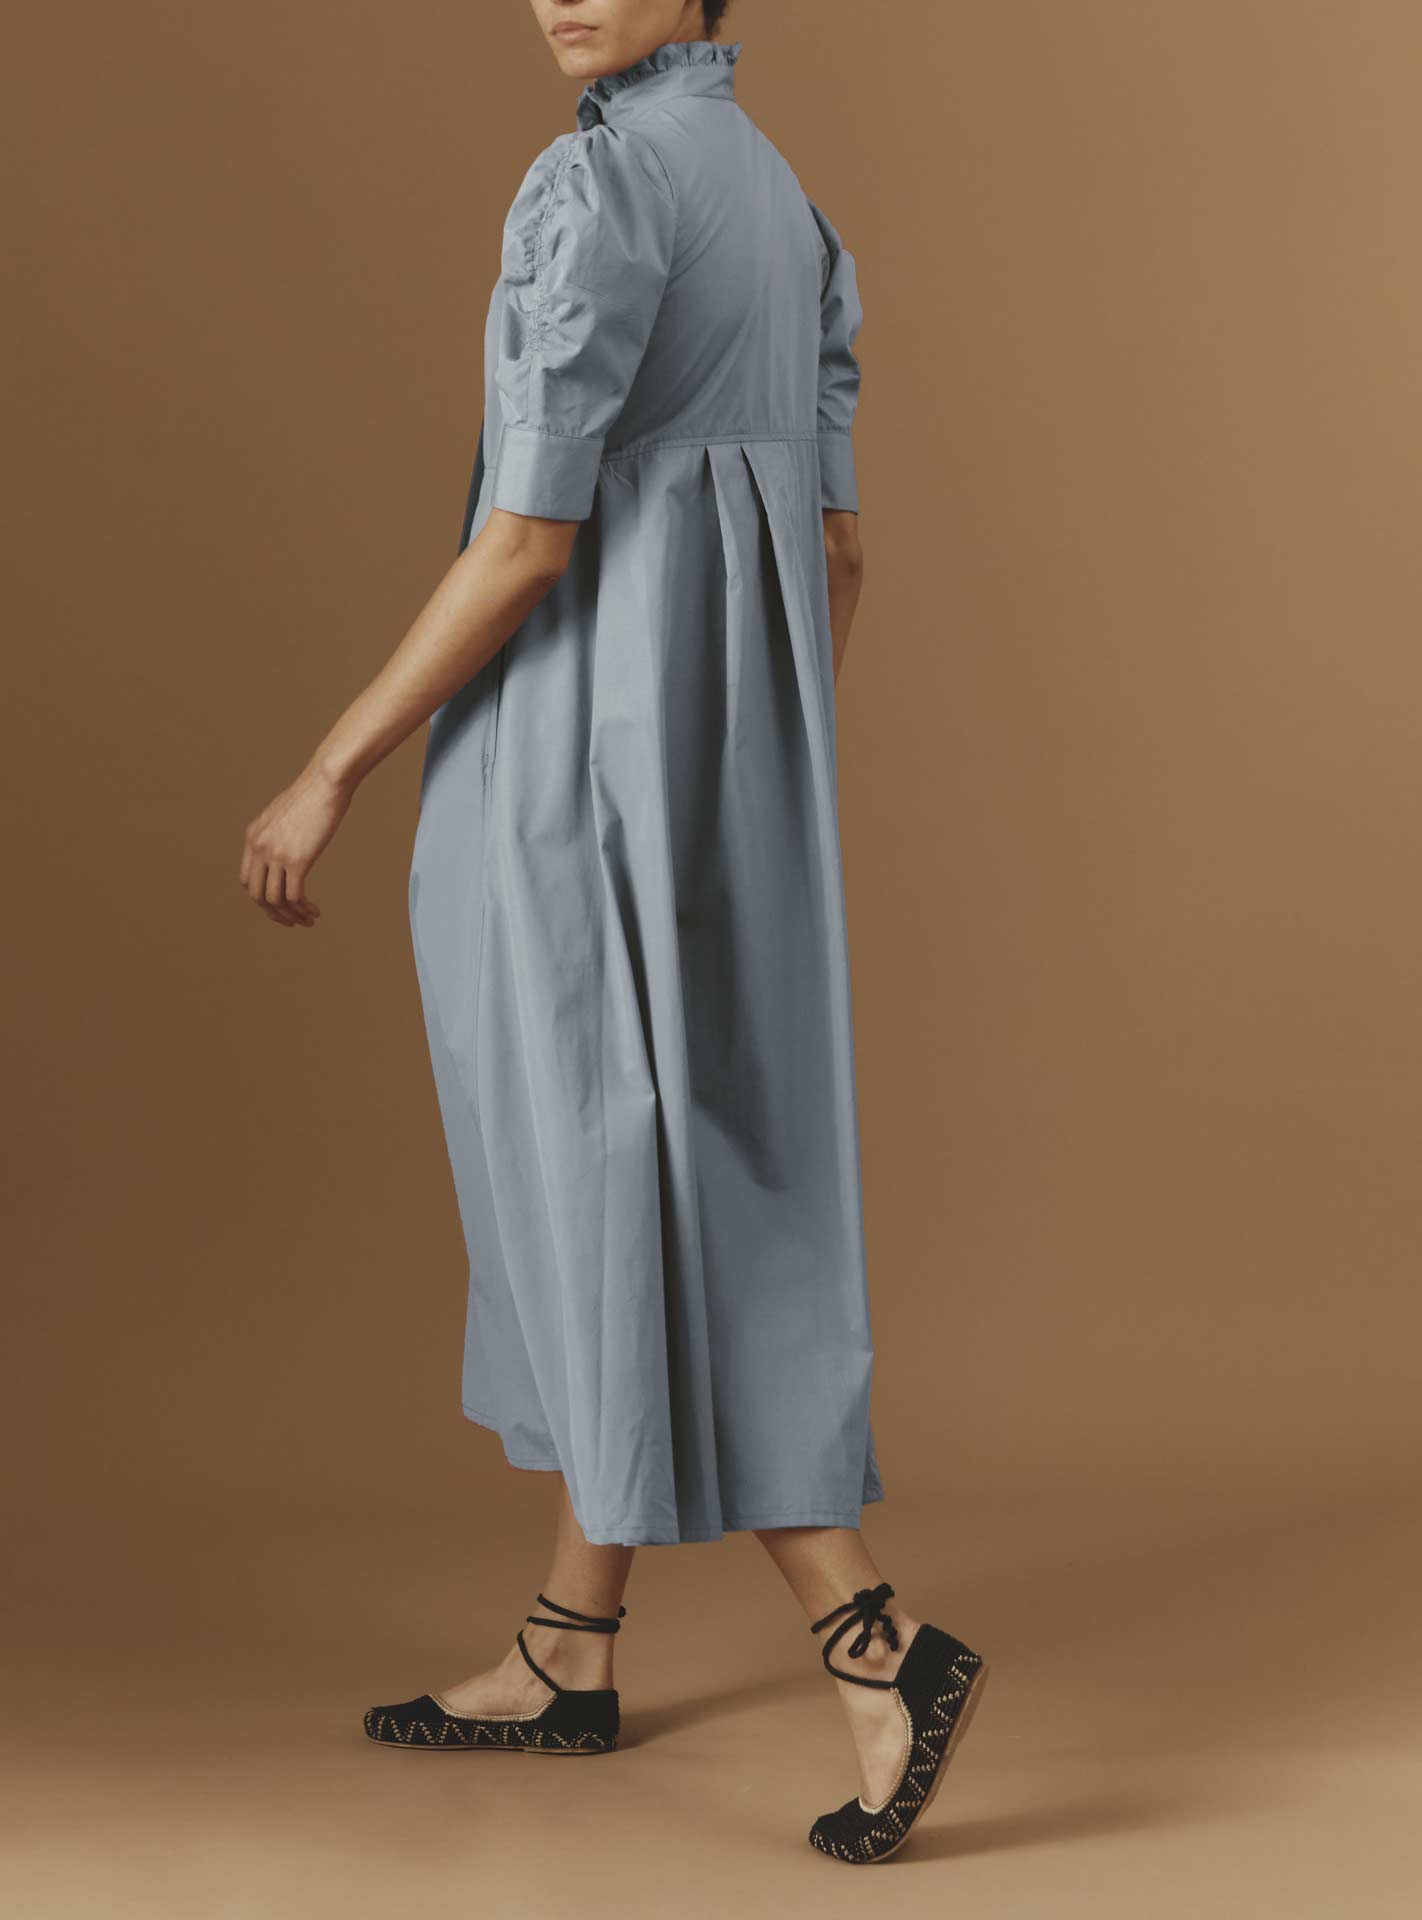 Back side view of Venetia Luxury Cotton Blue/Grey Dress by Thierry Colson